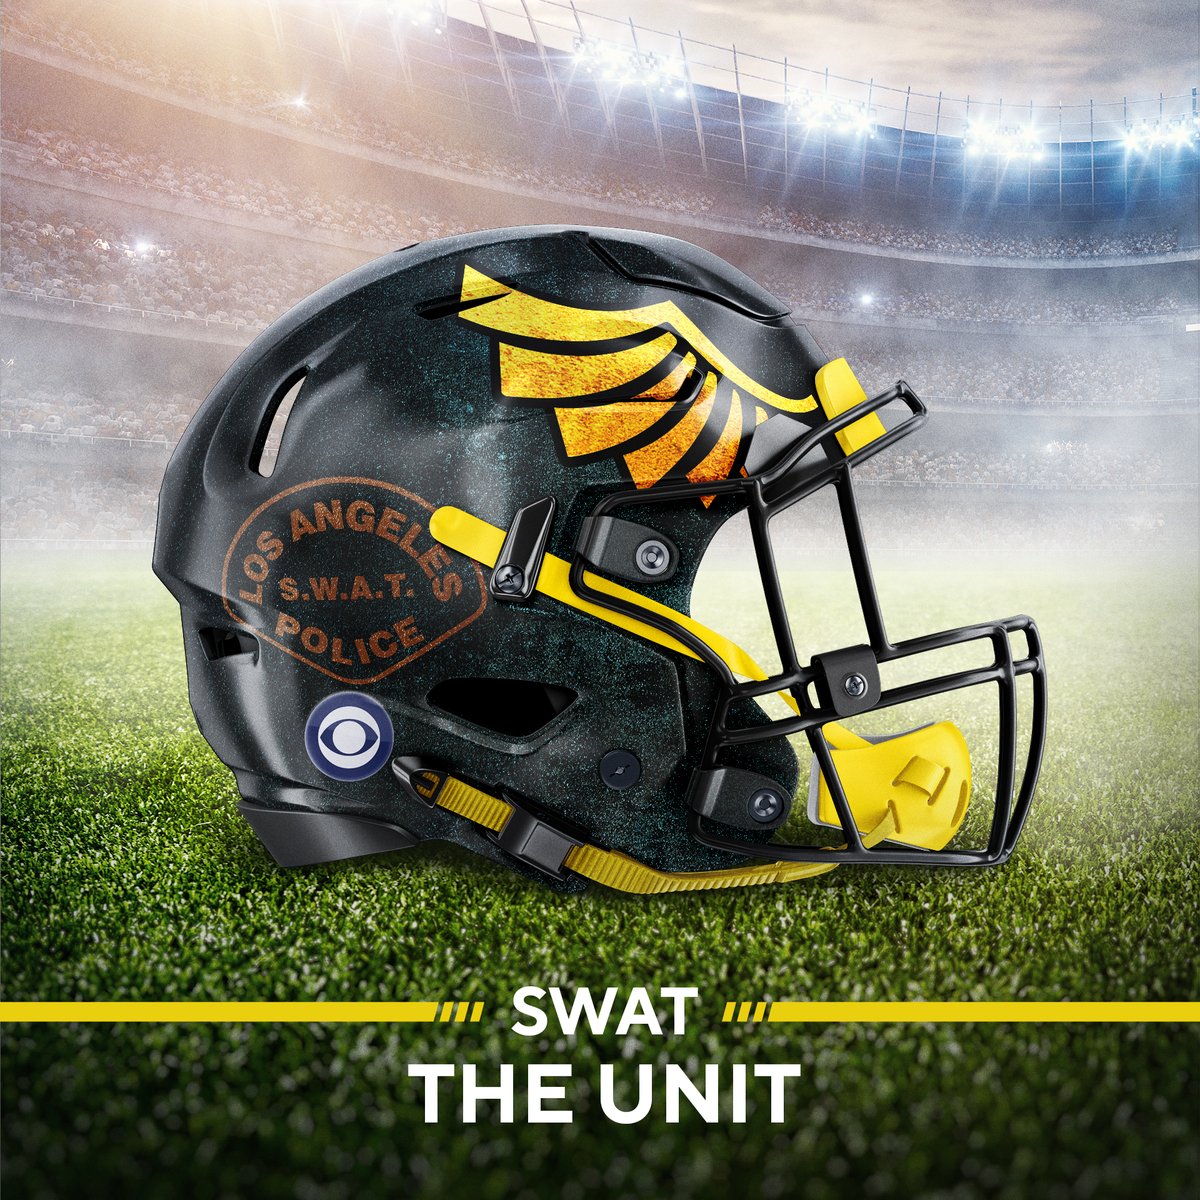 In a parallel universe, these custom NFL helmets are taking our #SWAT league by storm! Let’s play some @CBStv fantasy football and tell us which team name is your favorite. 🏈😻✨ #NFLonCBS